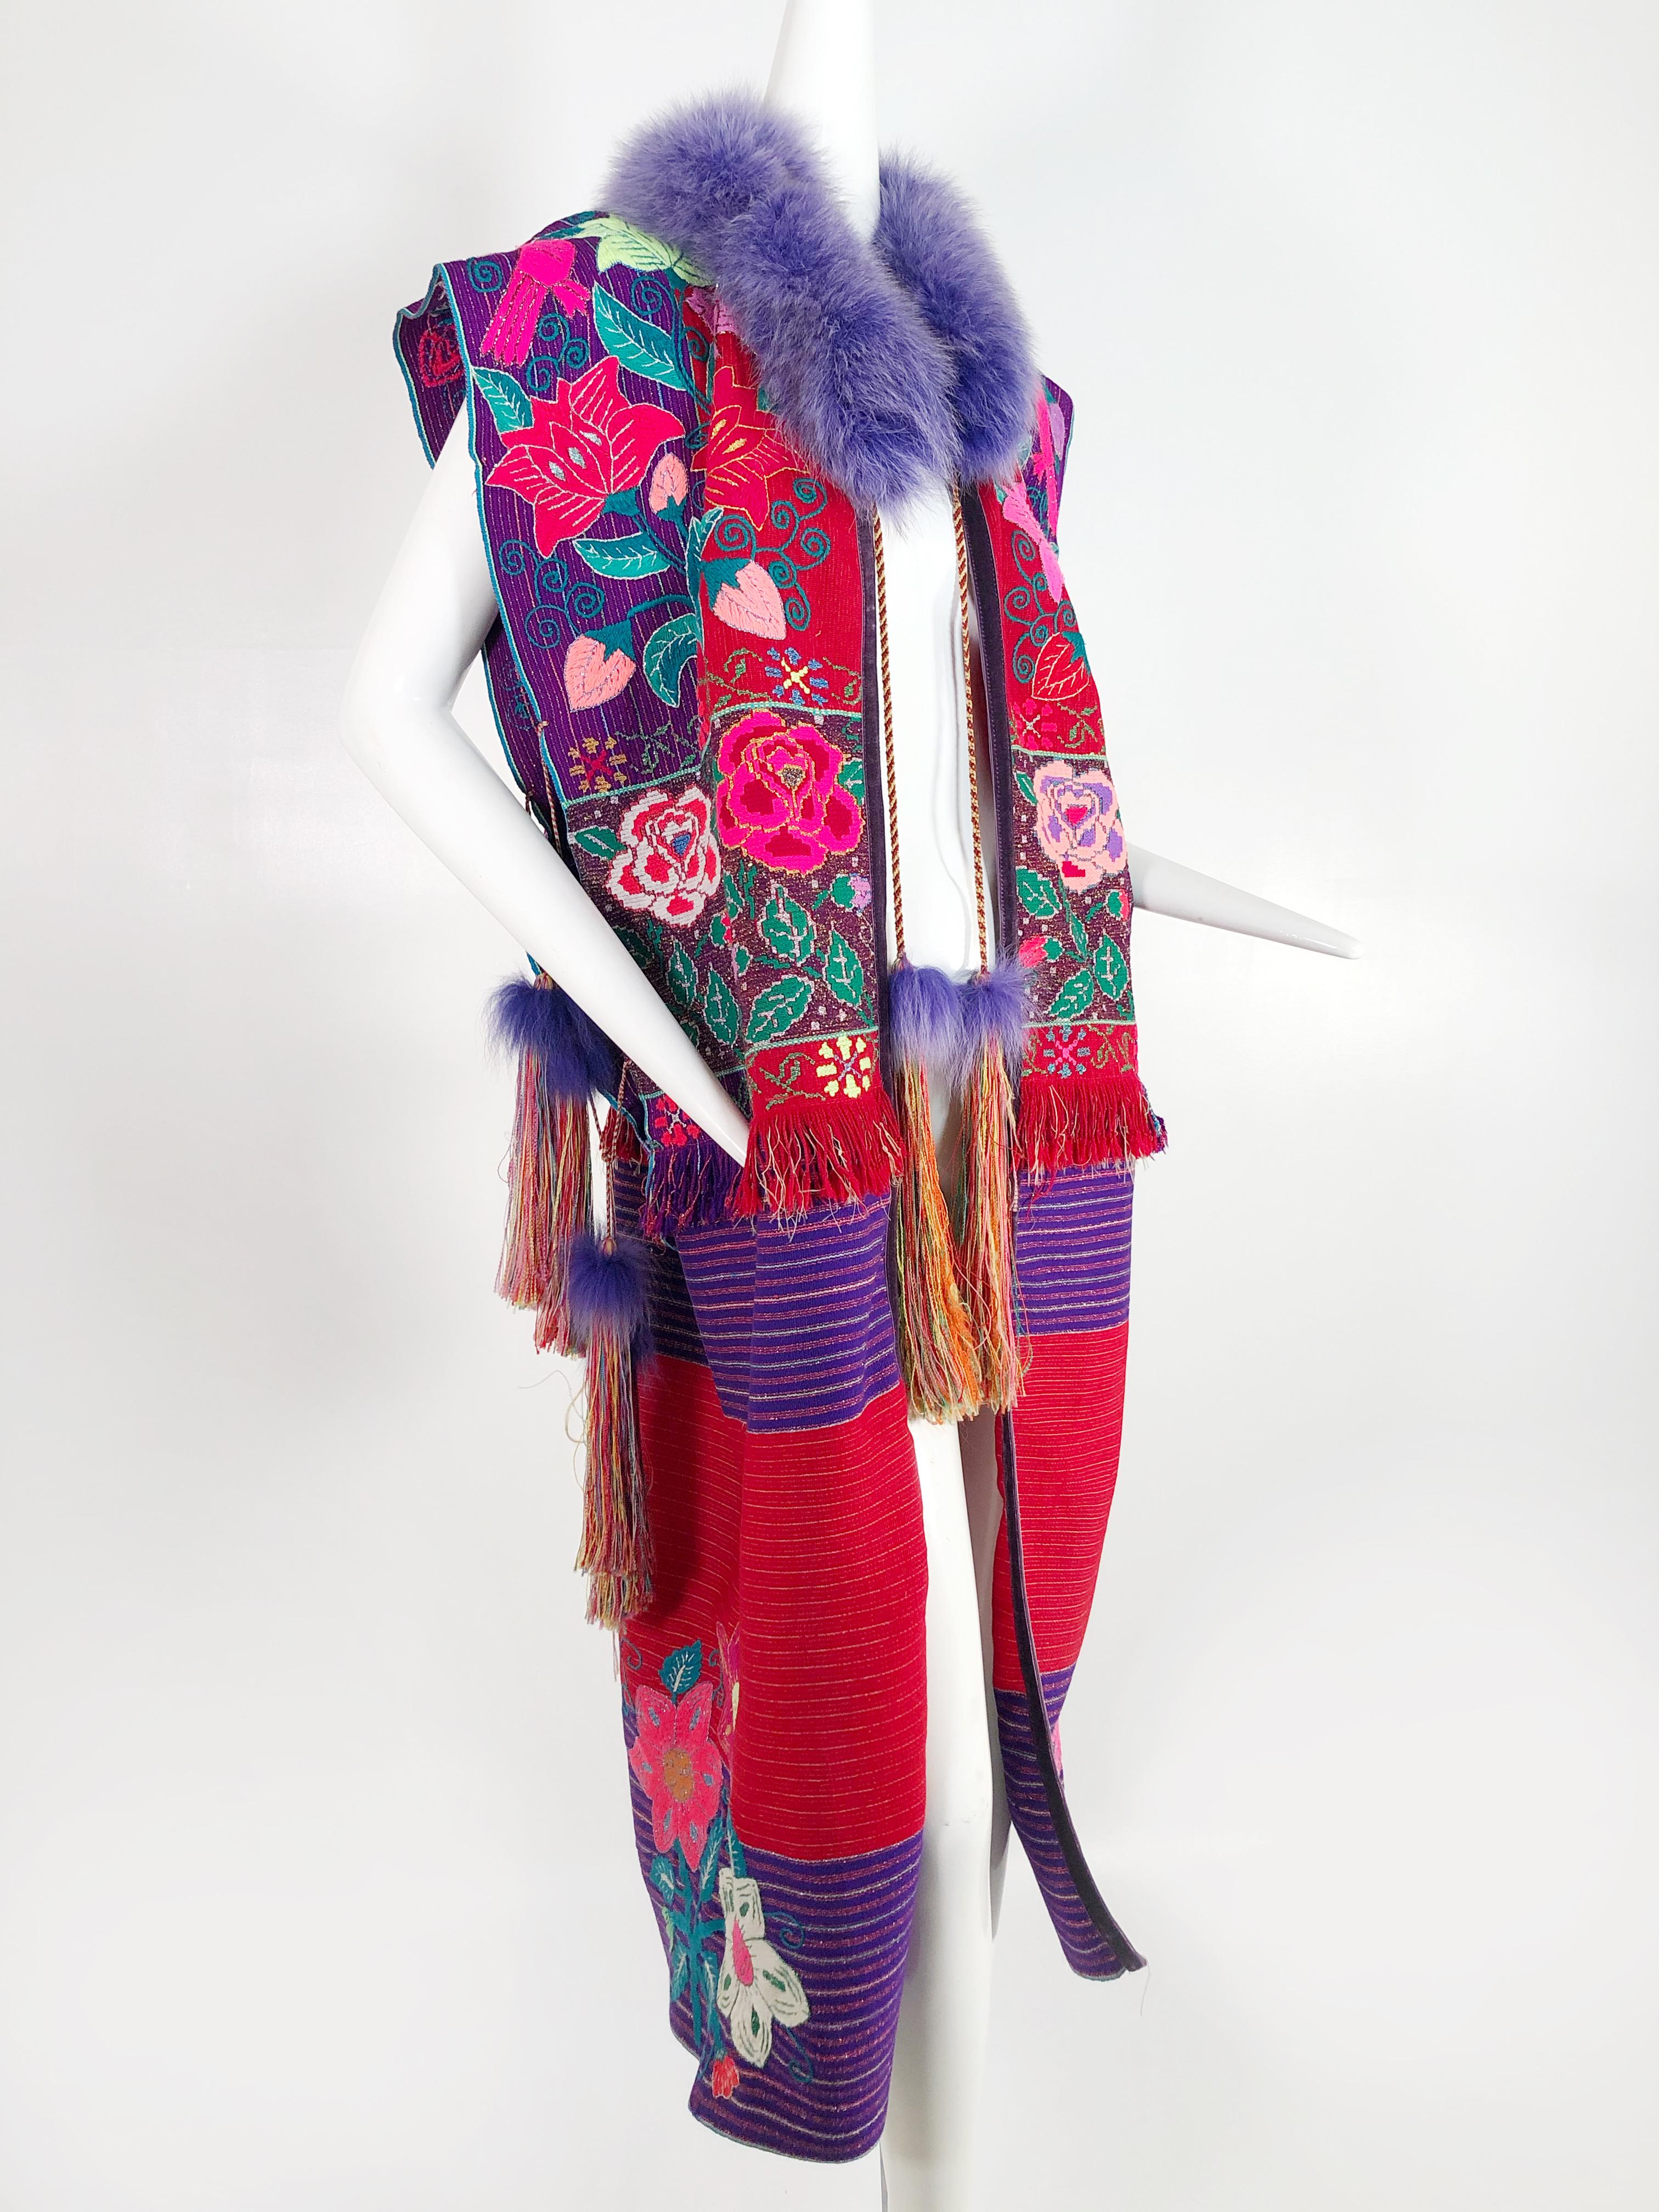 Custom-made colorful folkloric vestment of authentic vintage Mexican textiles with lavender fox fur collar and tassel trim. Front and side ties. Cotton/rayon blend. Unlined. 